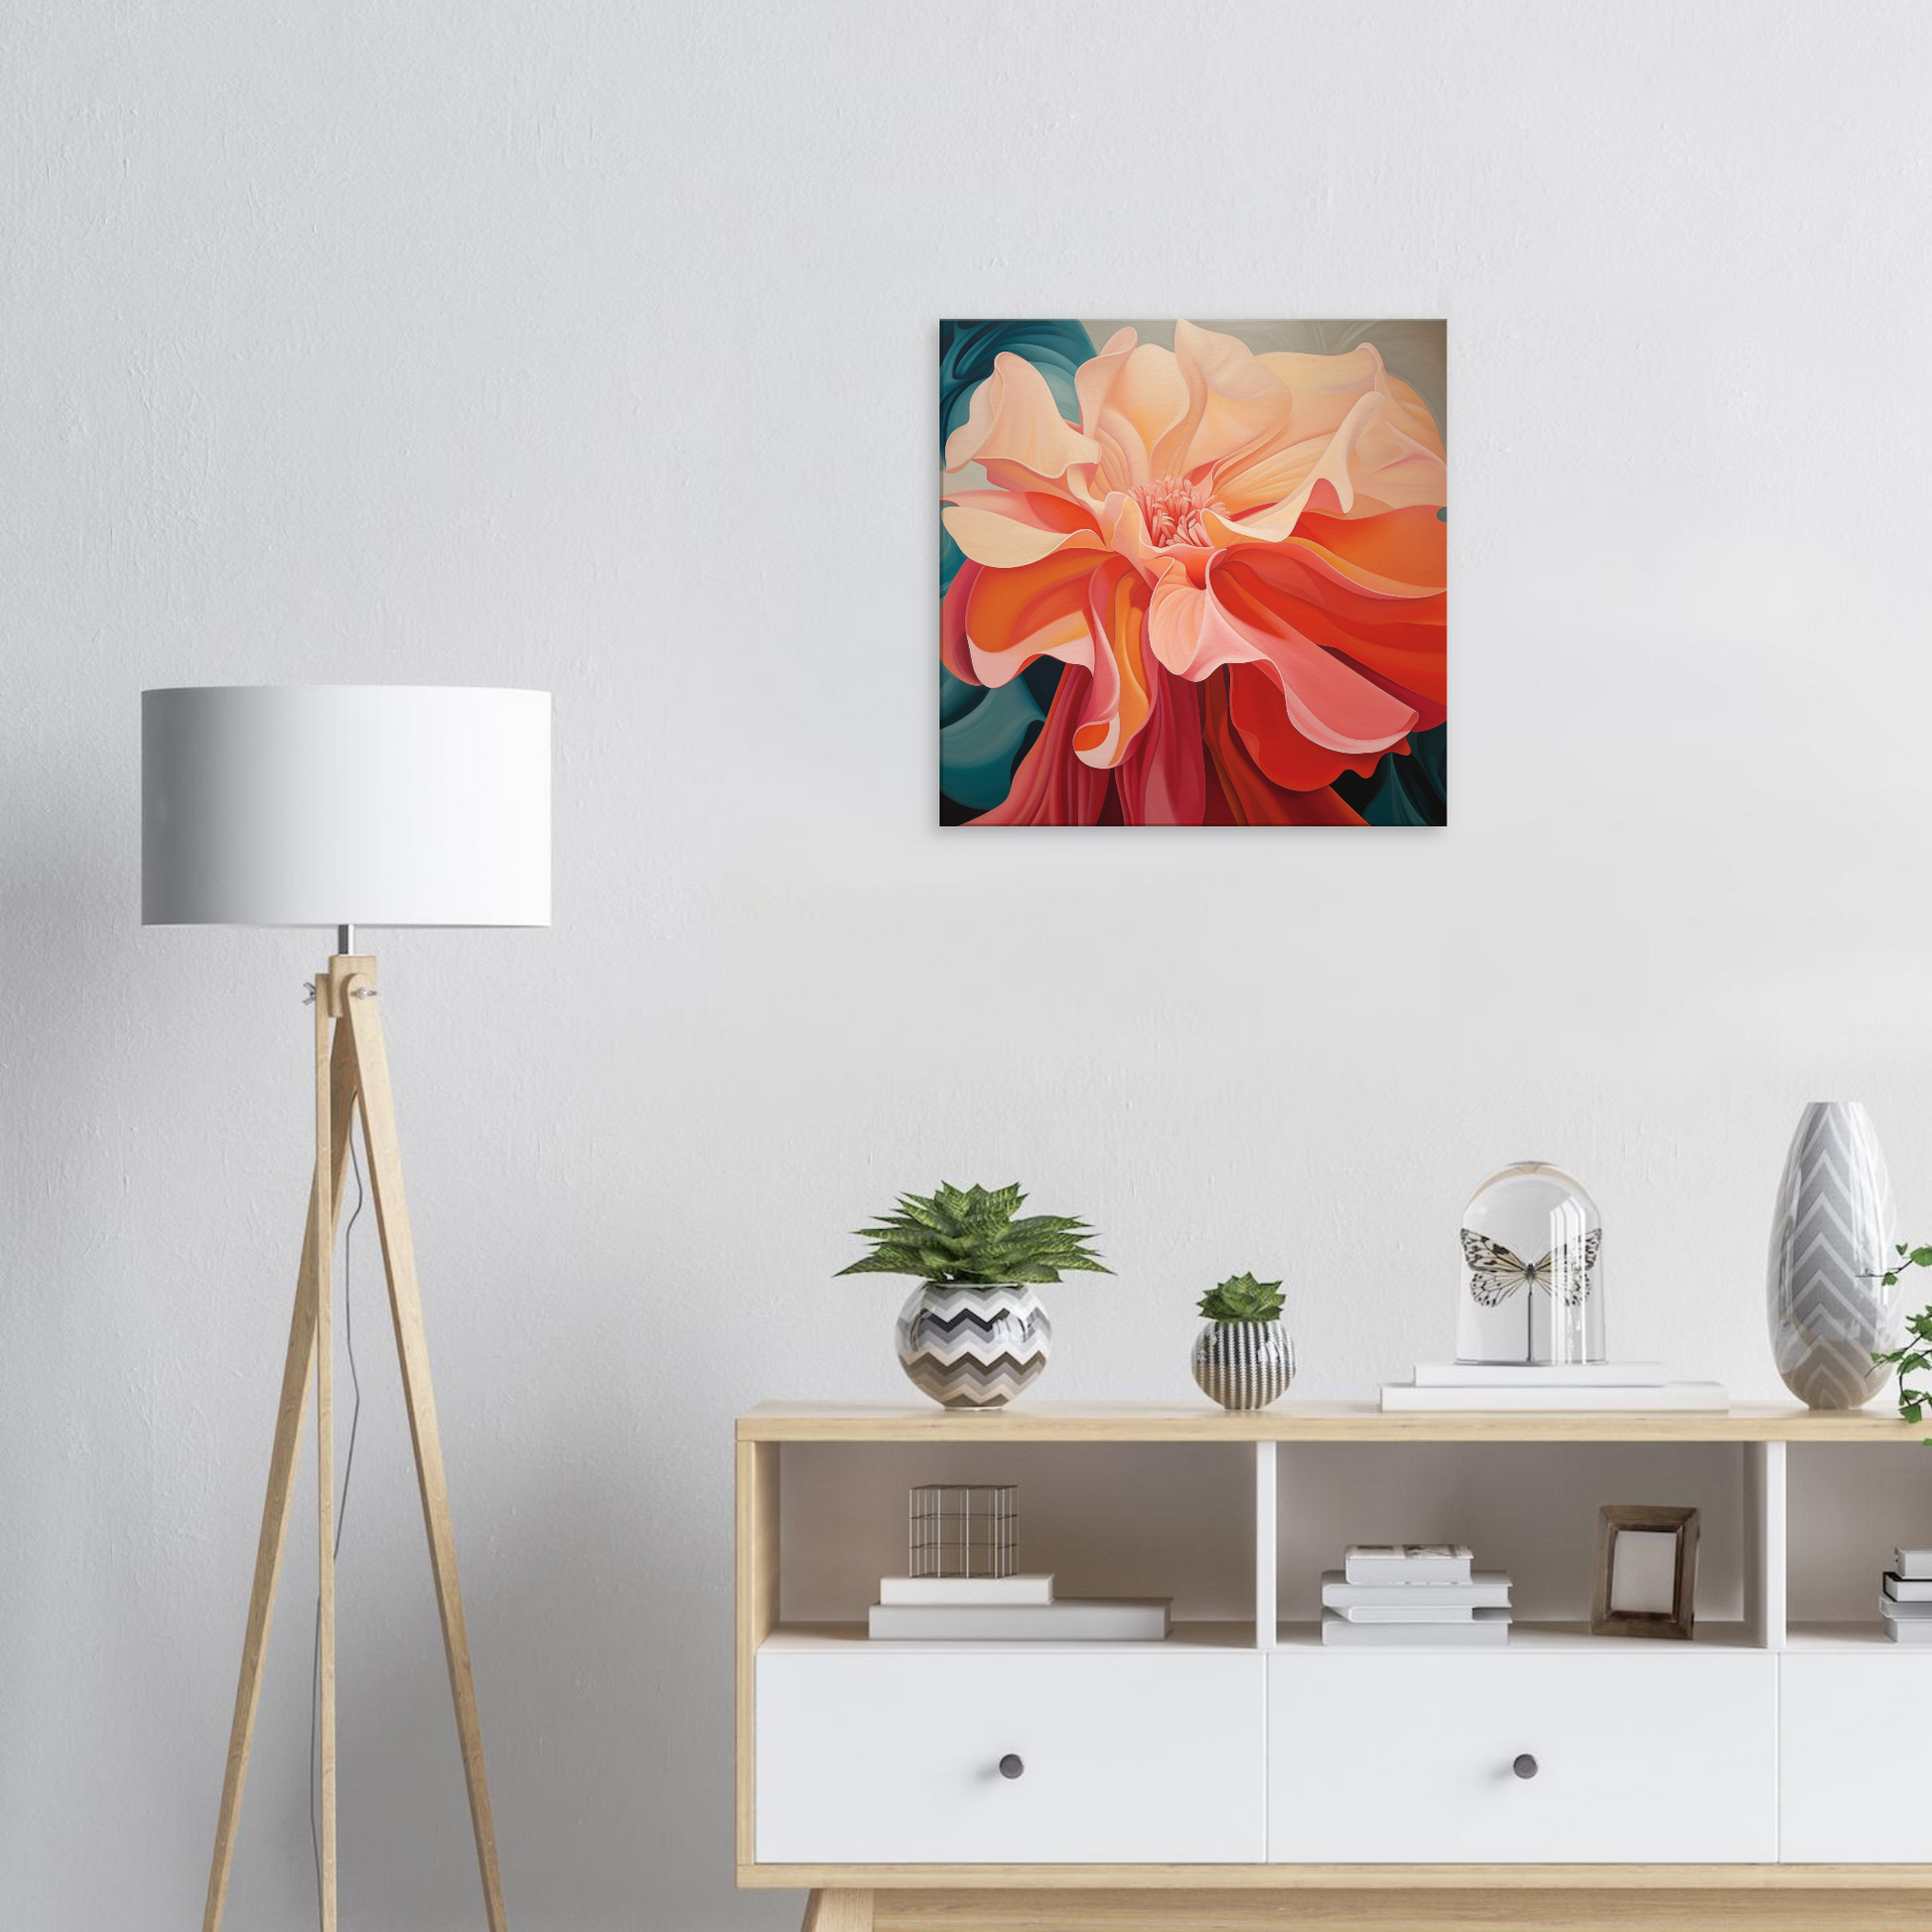 A high-quality "The Wild In The Flower Inspired By Georgia O'Keefe - Canvas Print" adorning the wall in a cozy living room.